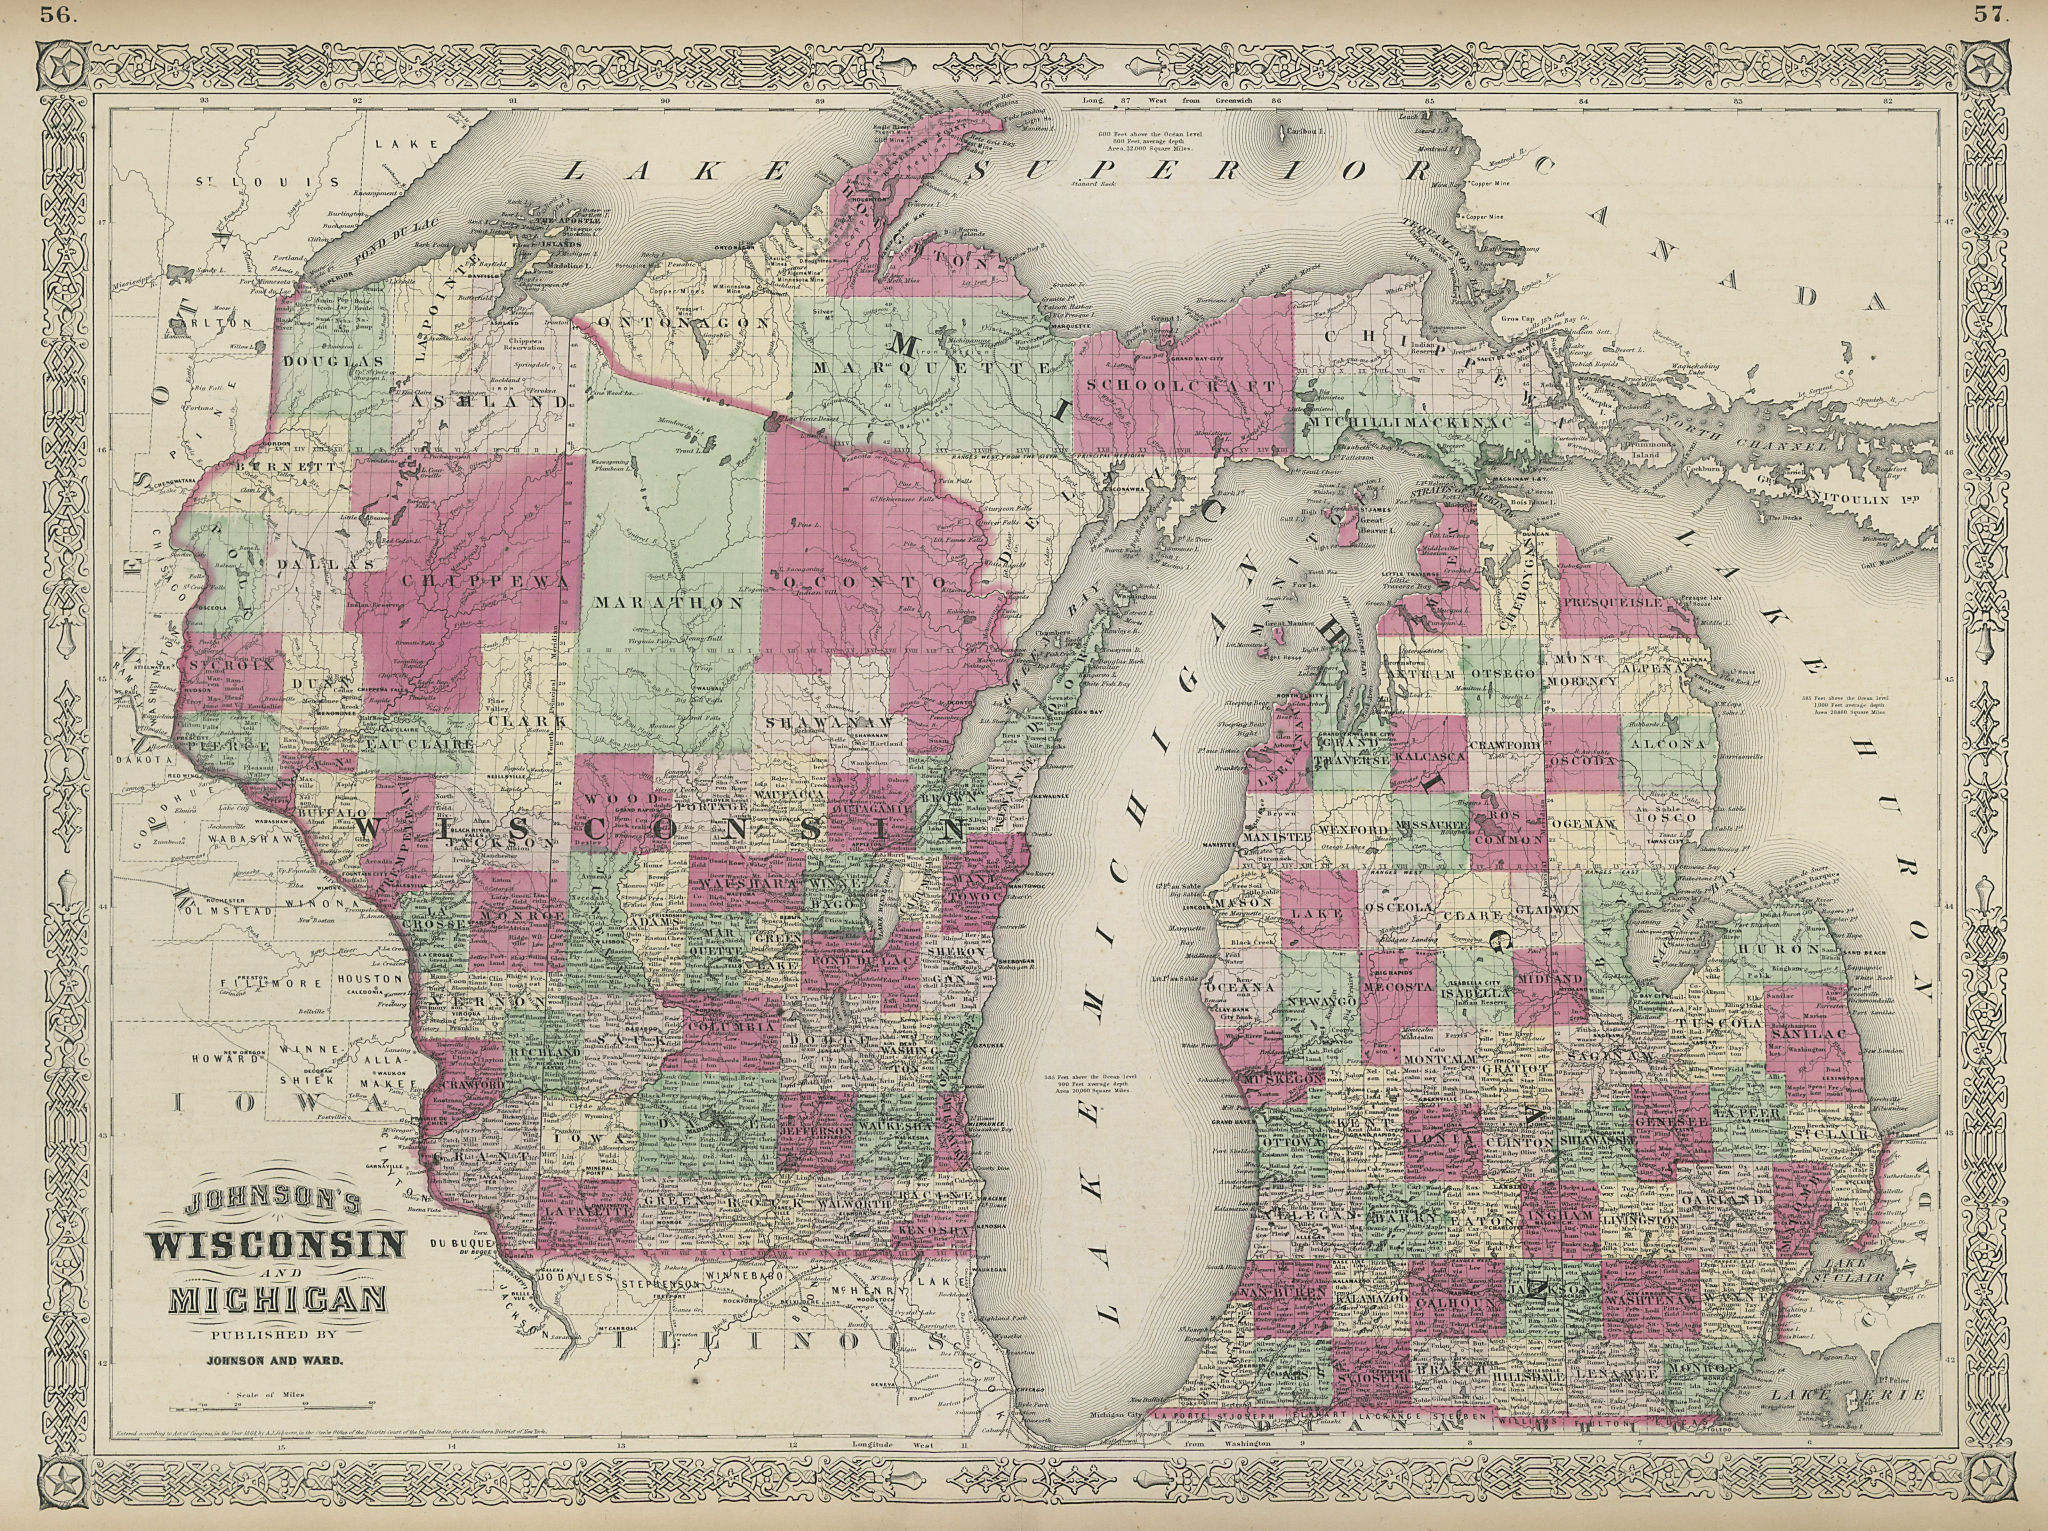 Associate Product Johnson's Wisconsin & Michigan. State map showing counties. Great Lakes 1865